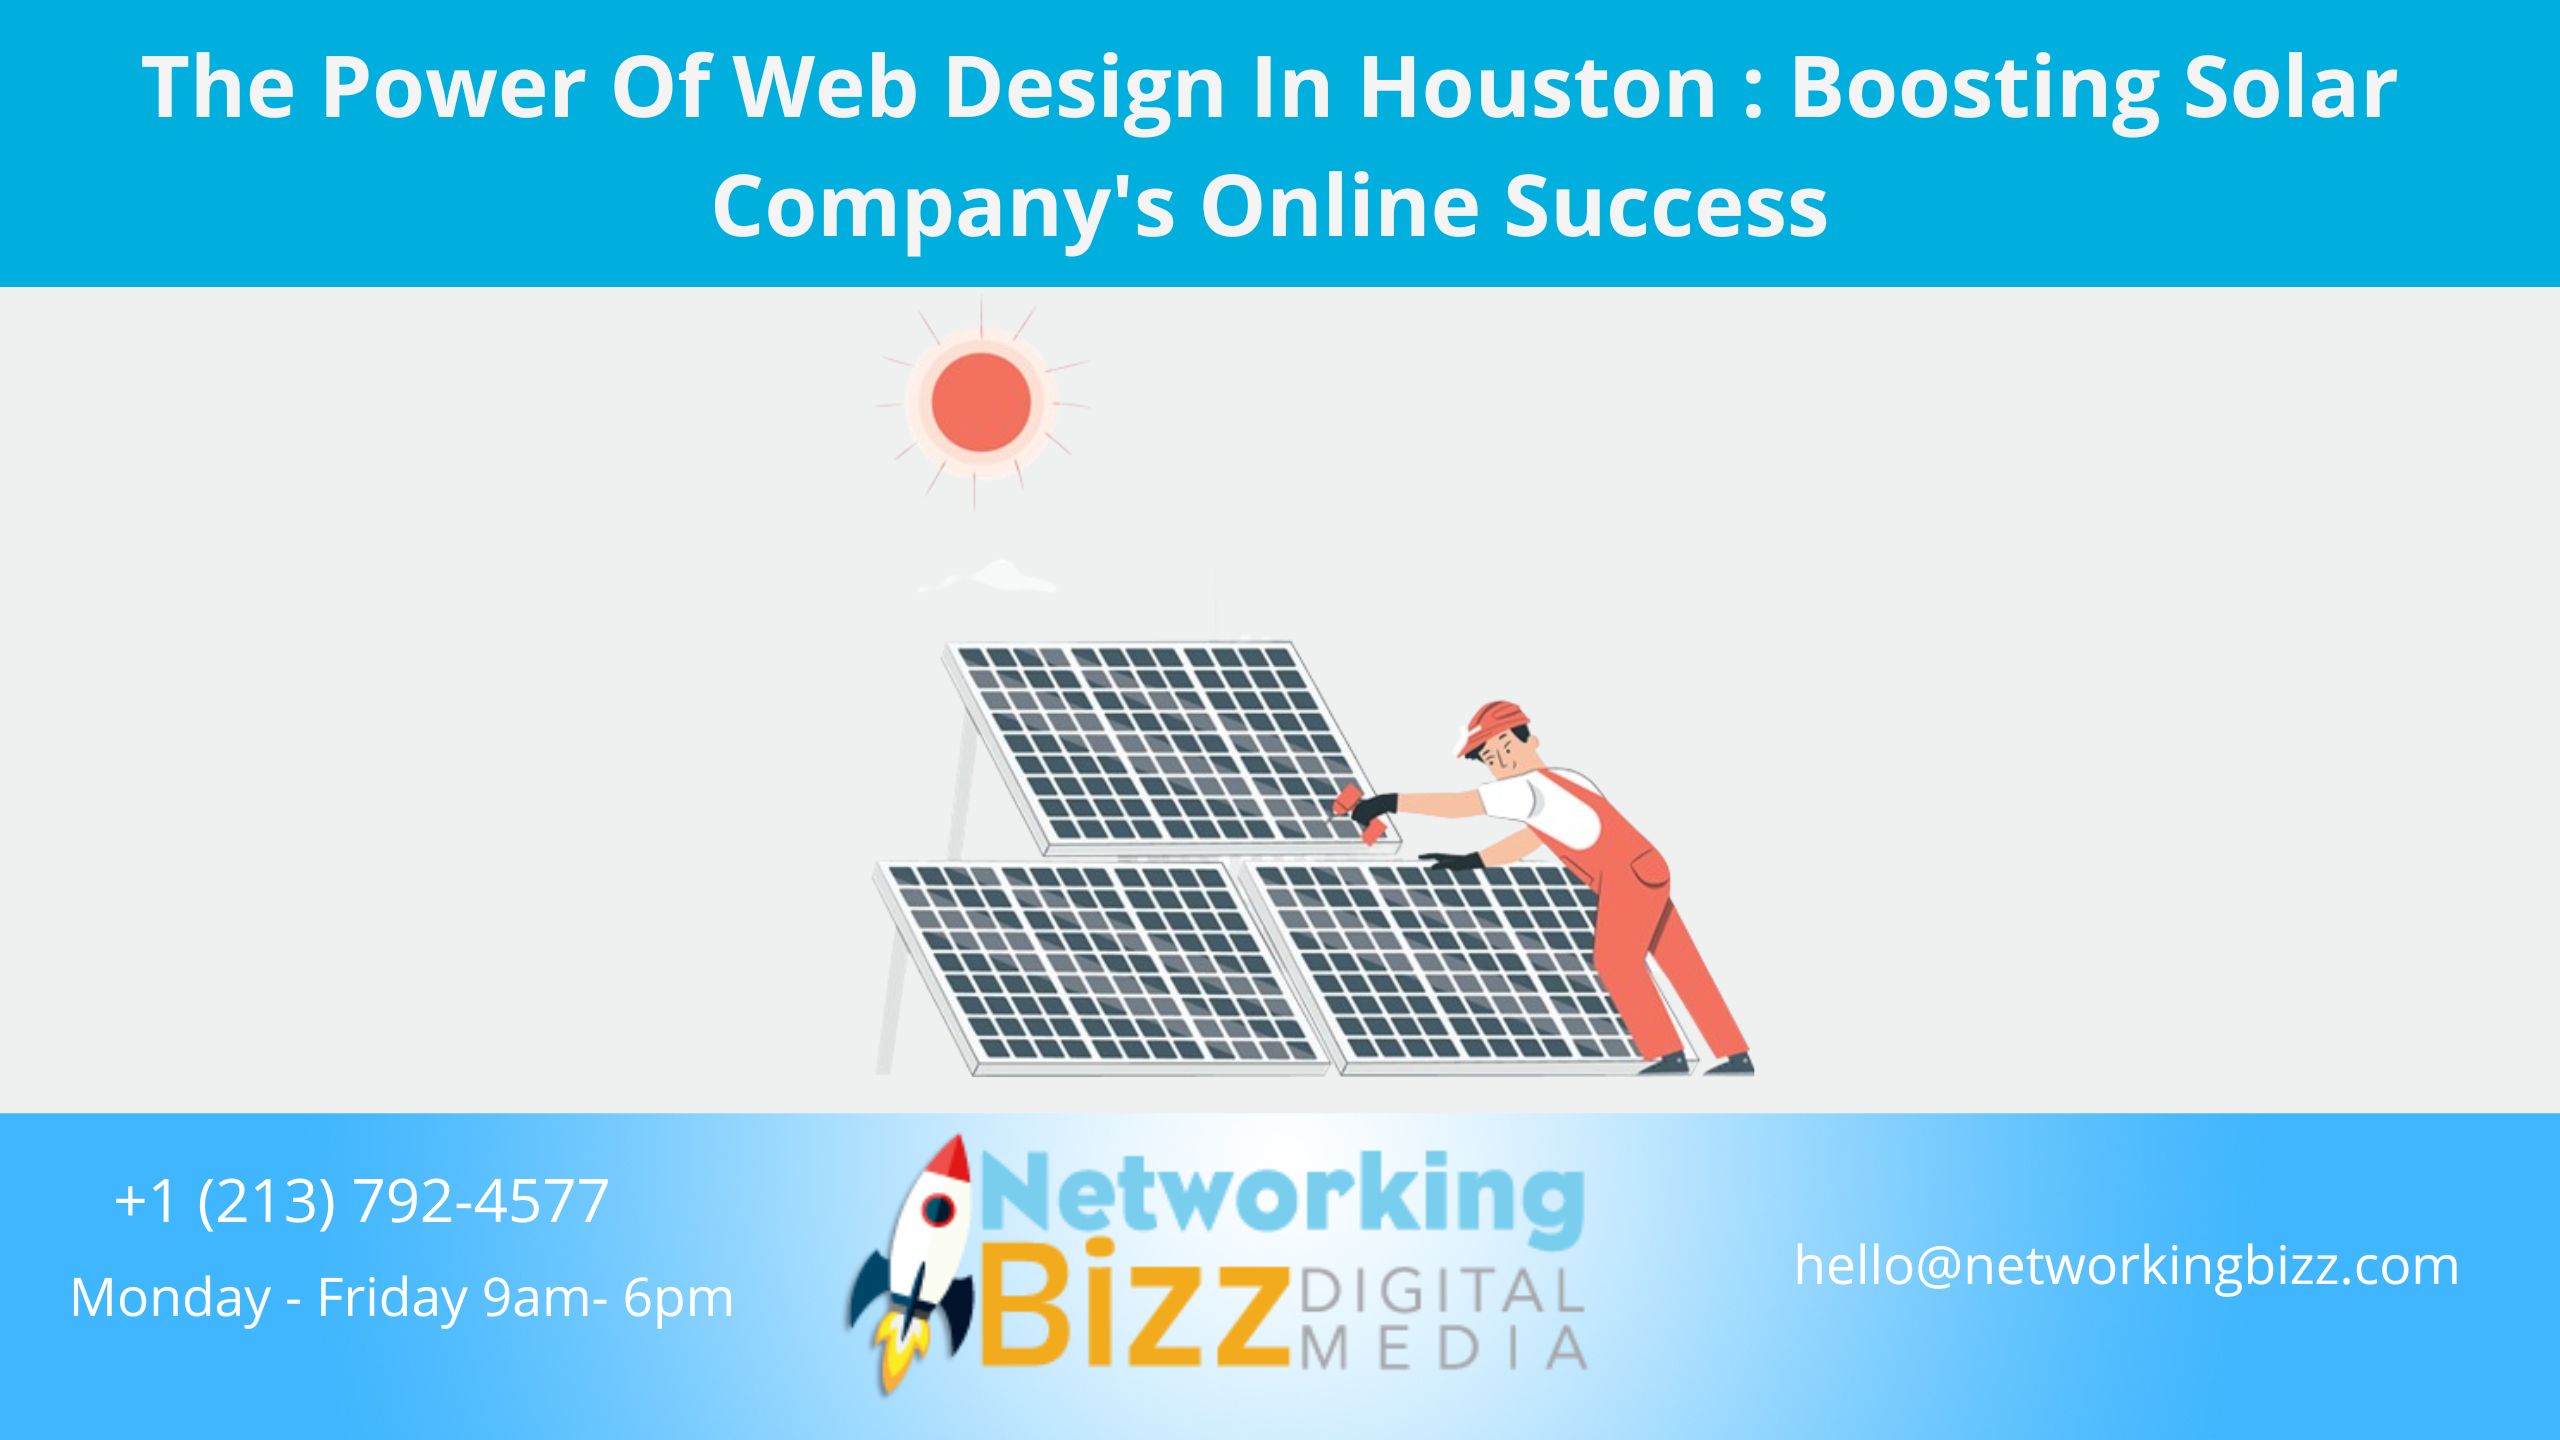 The Power Of Web Design In Houston : Boosting Solar Company’s Online Success